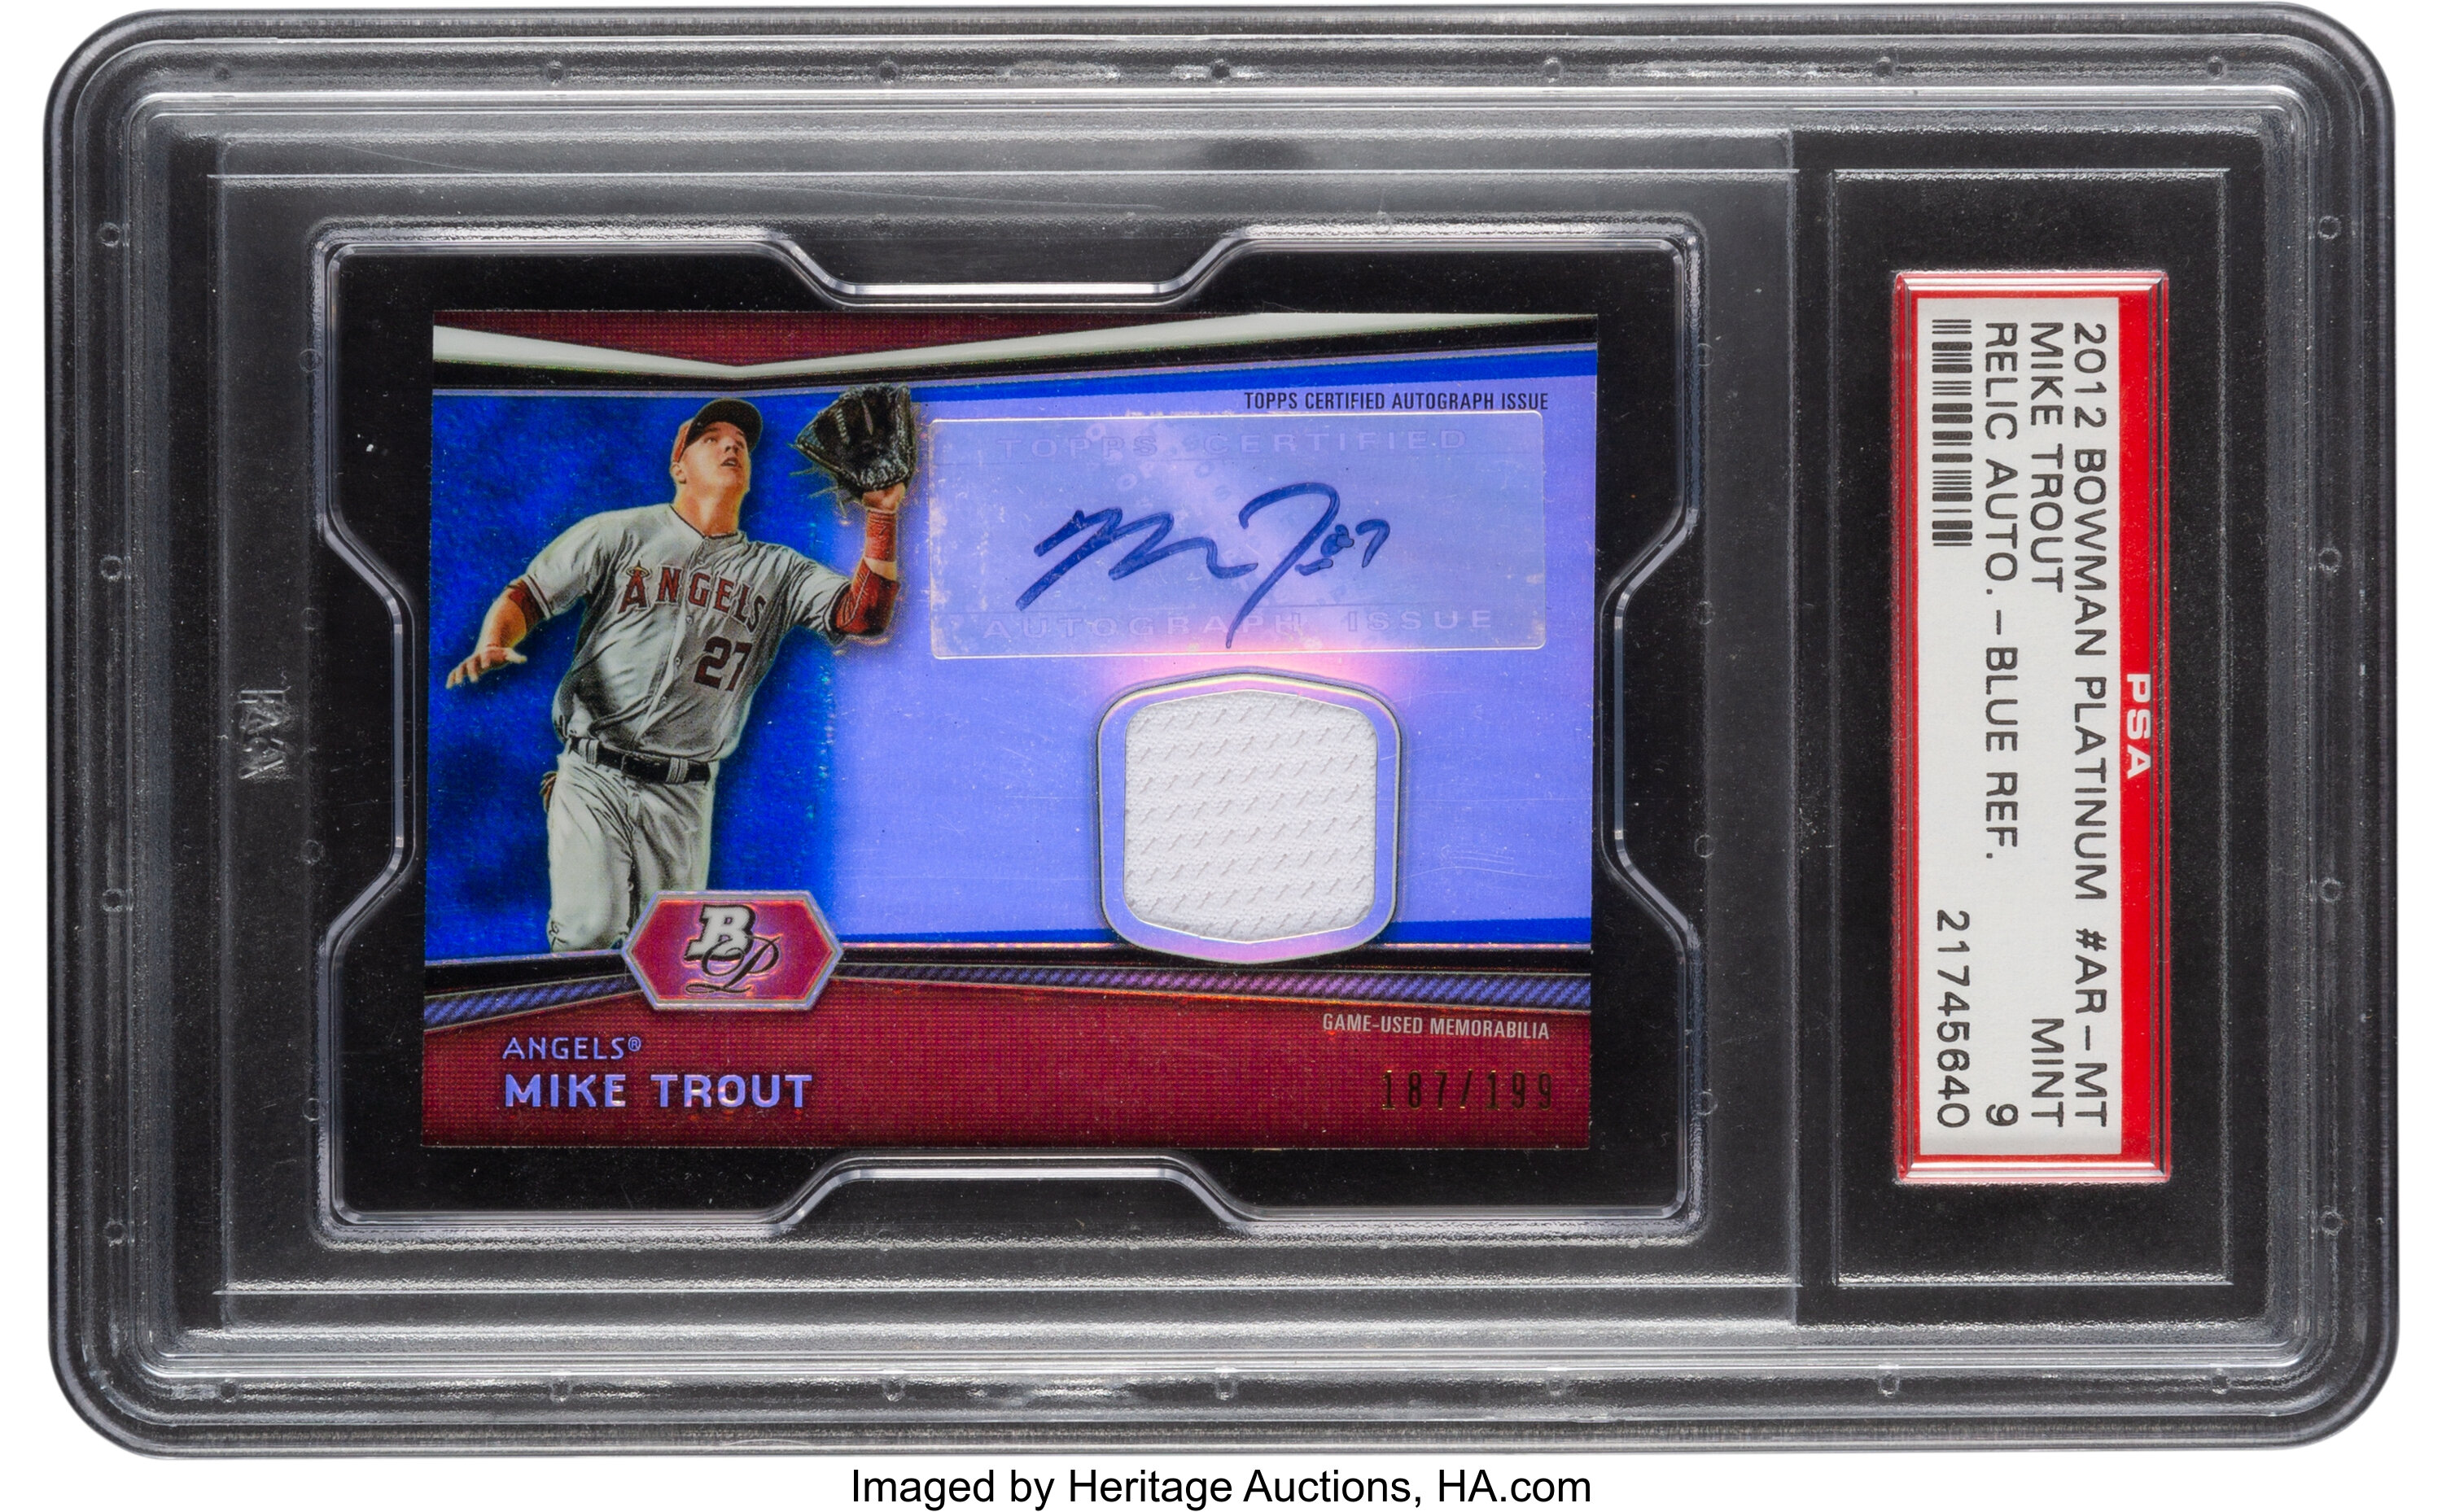 Sold at Auction: Mike Trout signed and framed jersey PSA